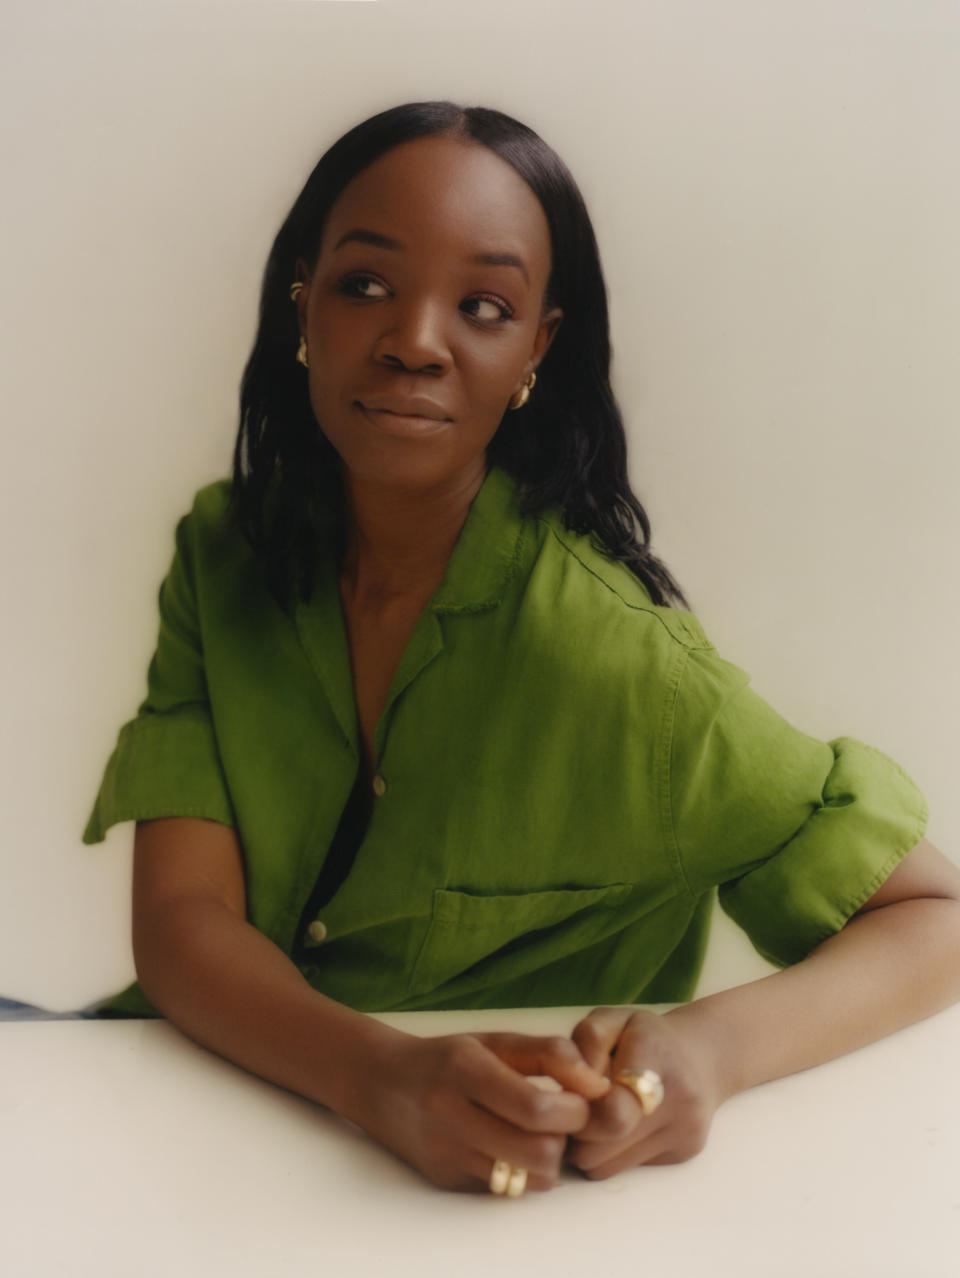 A portrait of Recho Omondi in a green blouse on a white background